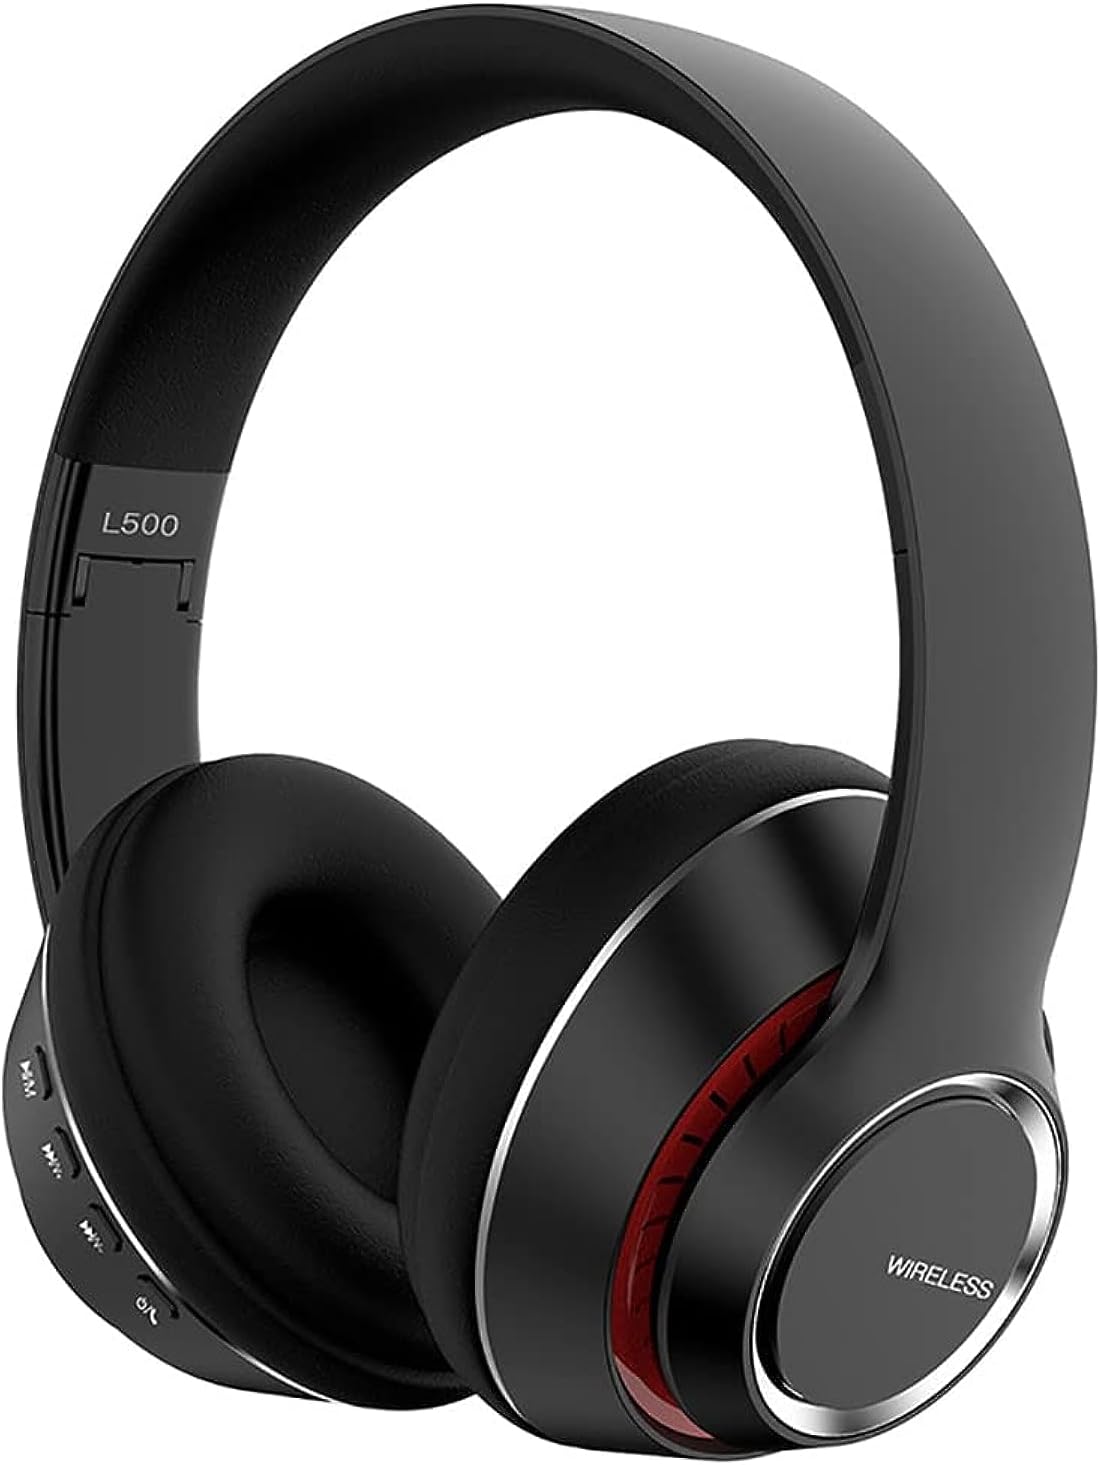 Sky-Touch Wireless Headphones, Noise Cancelling Bluetooth 5.0 Over-Ear Headphone Pure Sound For Mobile Phones, Tablets, Laptops Black, Universal